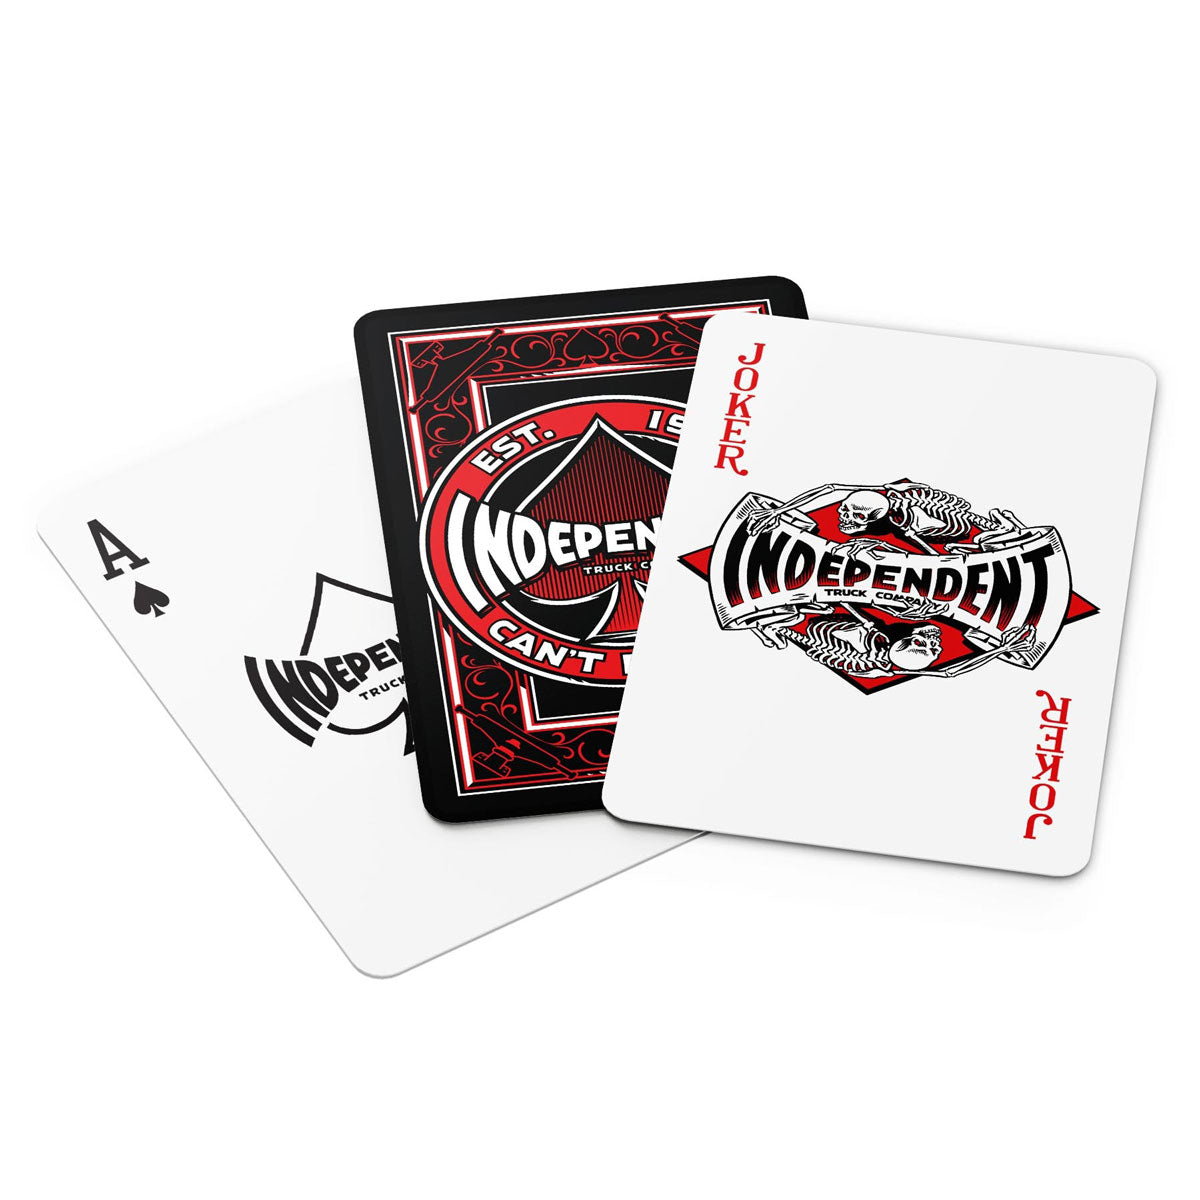 Independent Can't Be Beat Playing Cards - Black/Red image 3